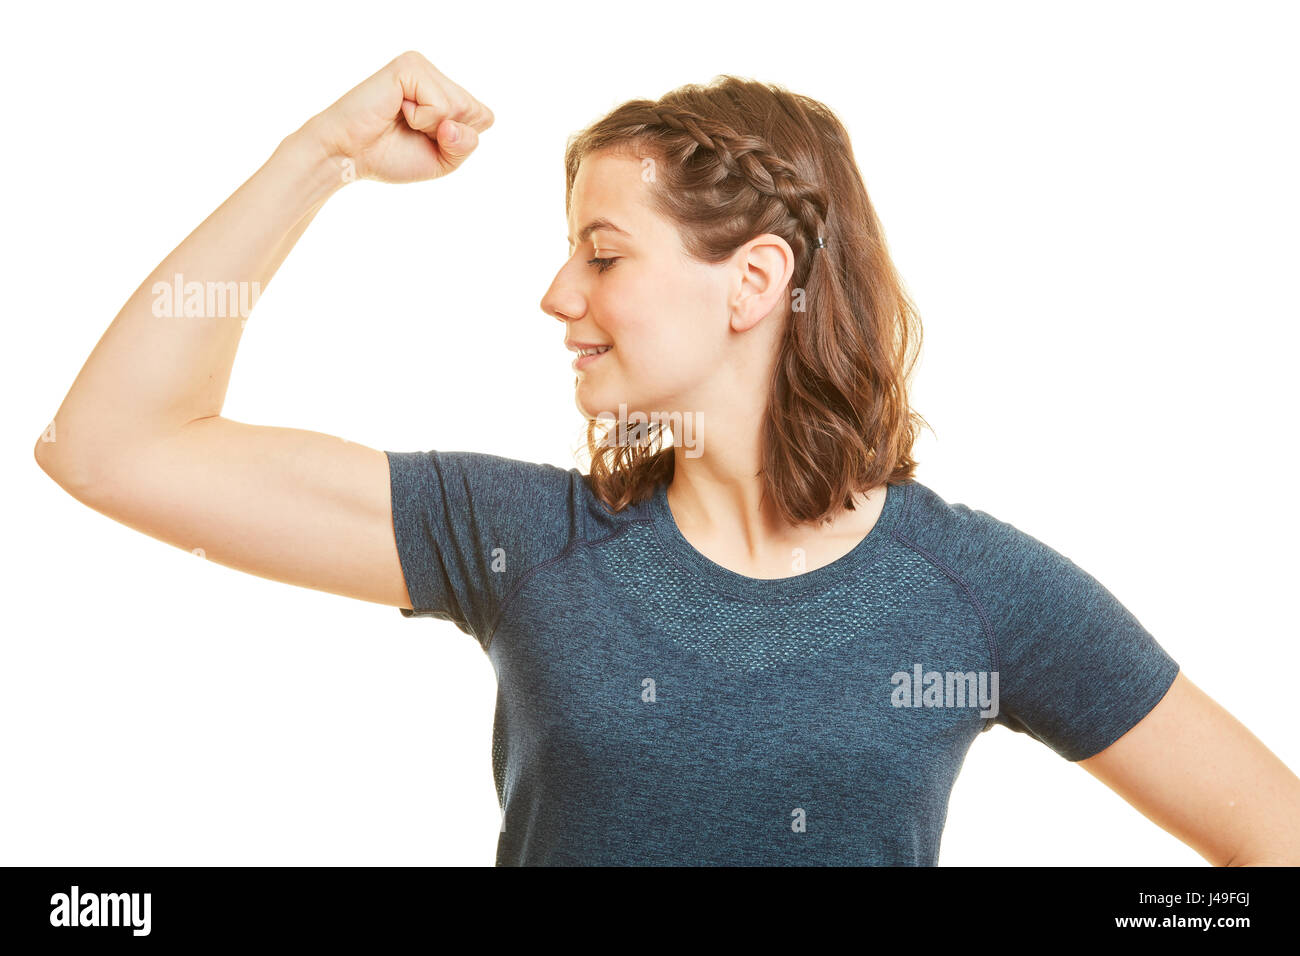 Sporty woman shows her arm muscles as sign of strongness and power Stock Photo